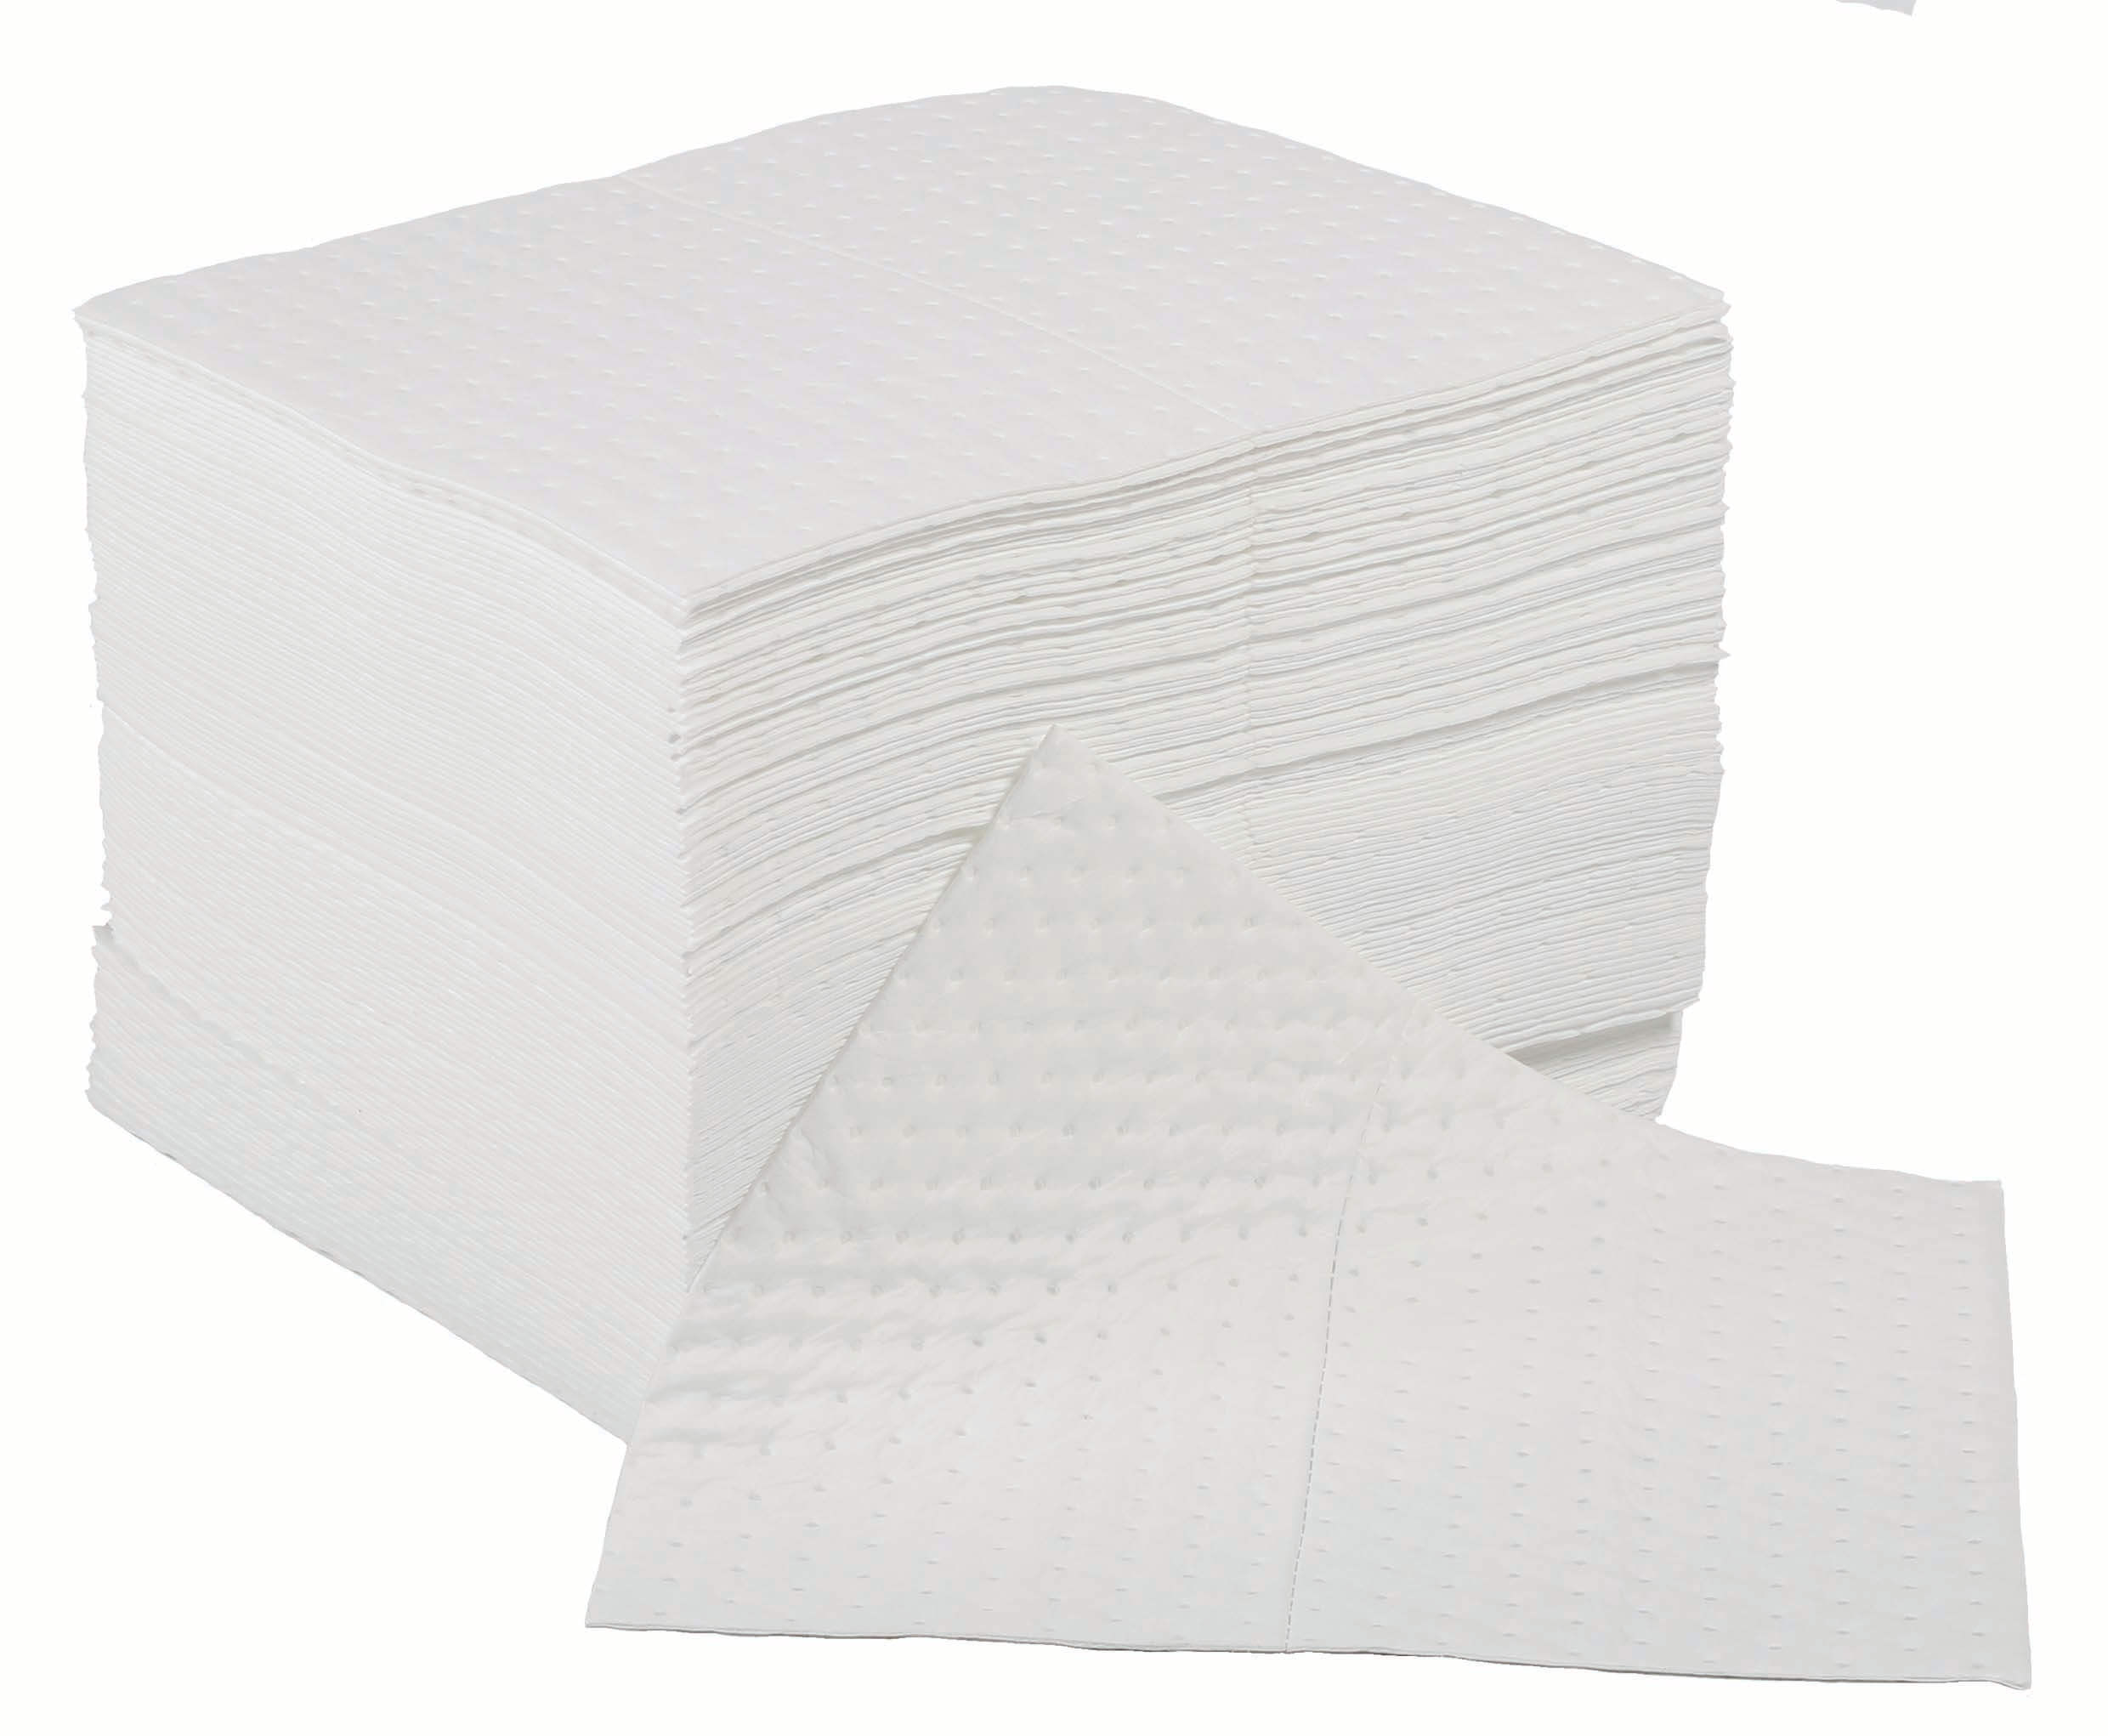 Single Weight Oil & Fuel Absorbent Pads - Polywrapped Pack of 200 